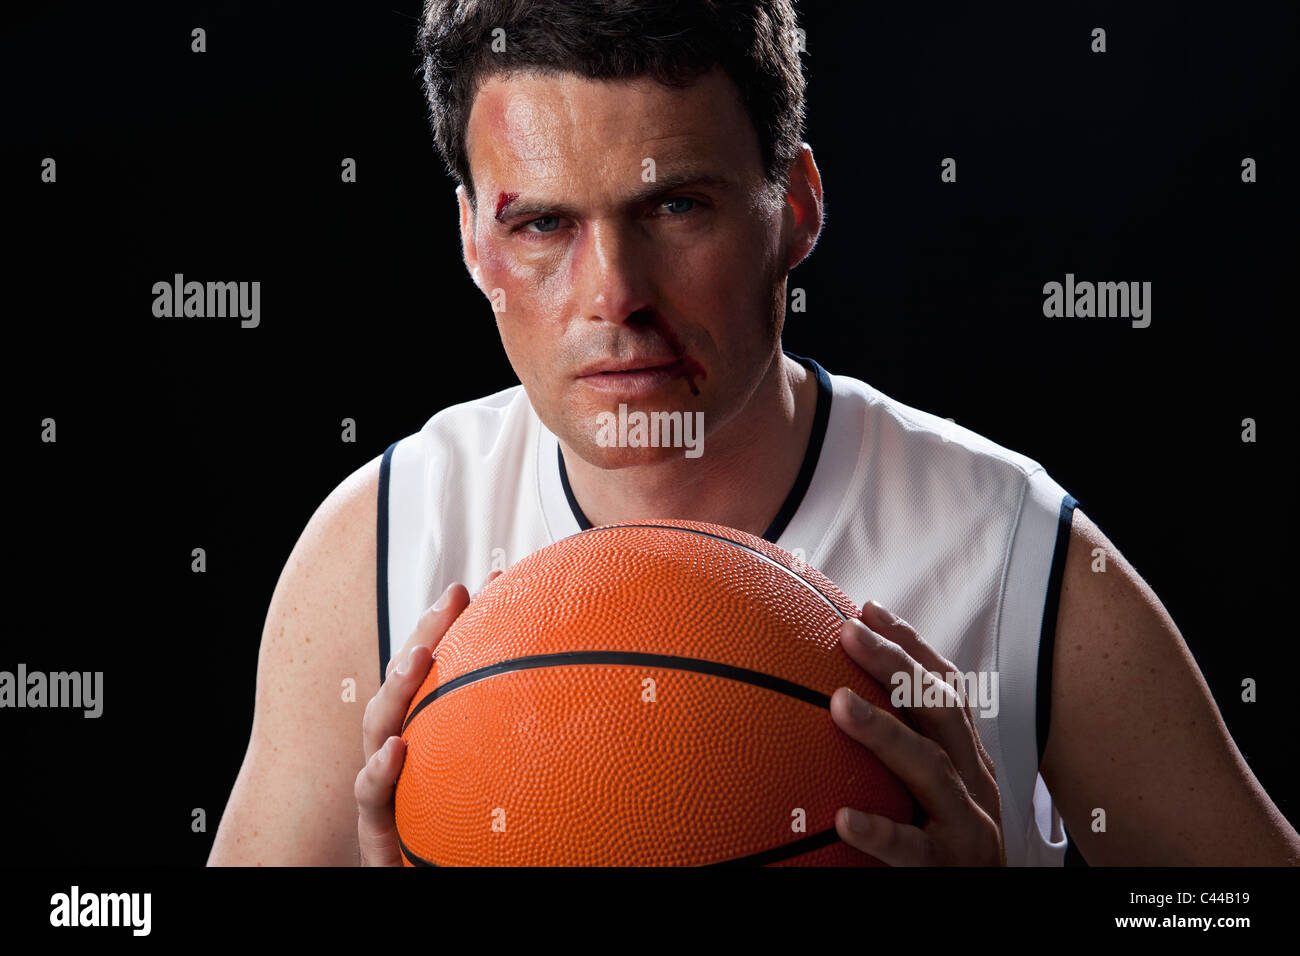 A bruised basketball player preparing to a pass the ball Stock Photo